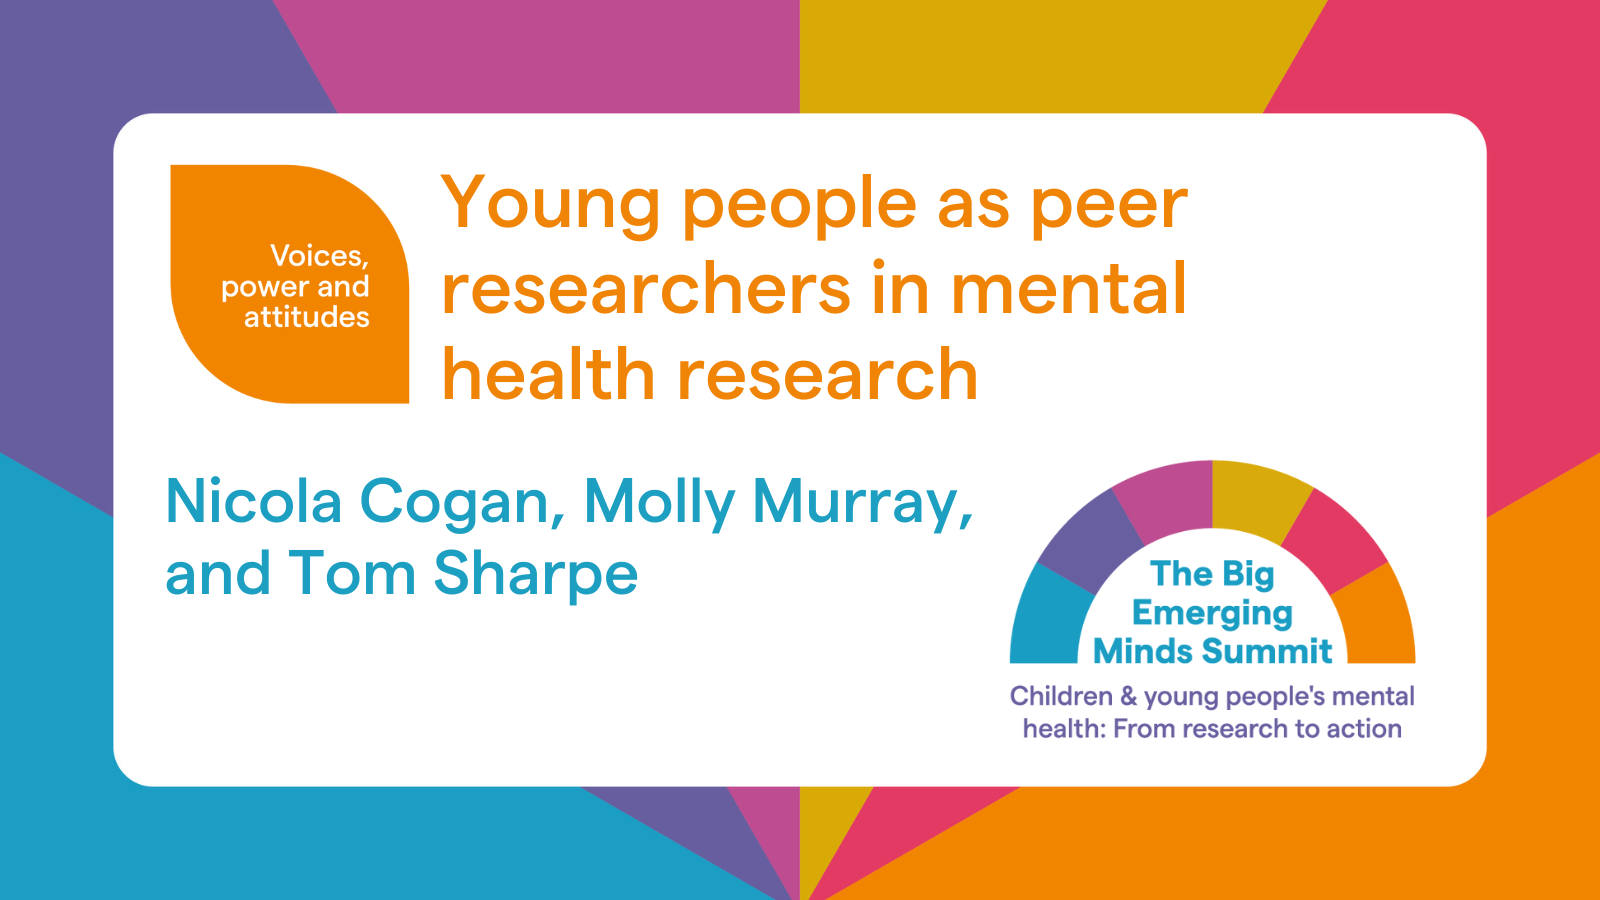 Young people as peer researchers in mental health research